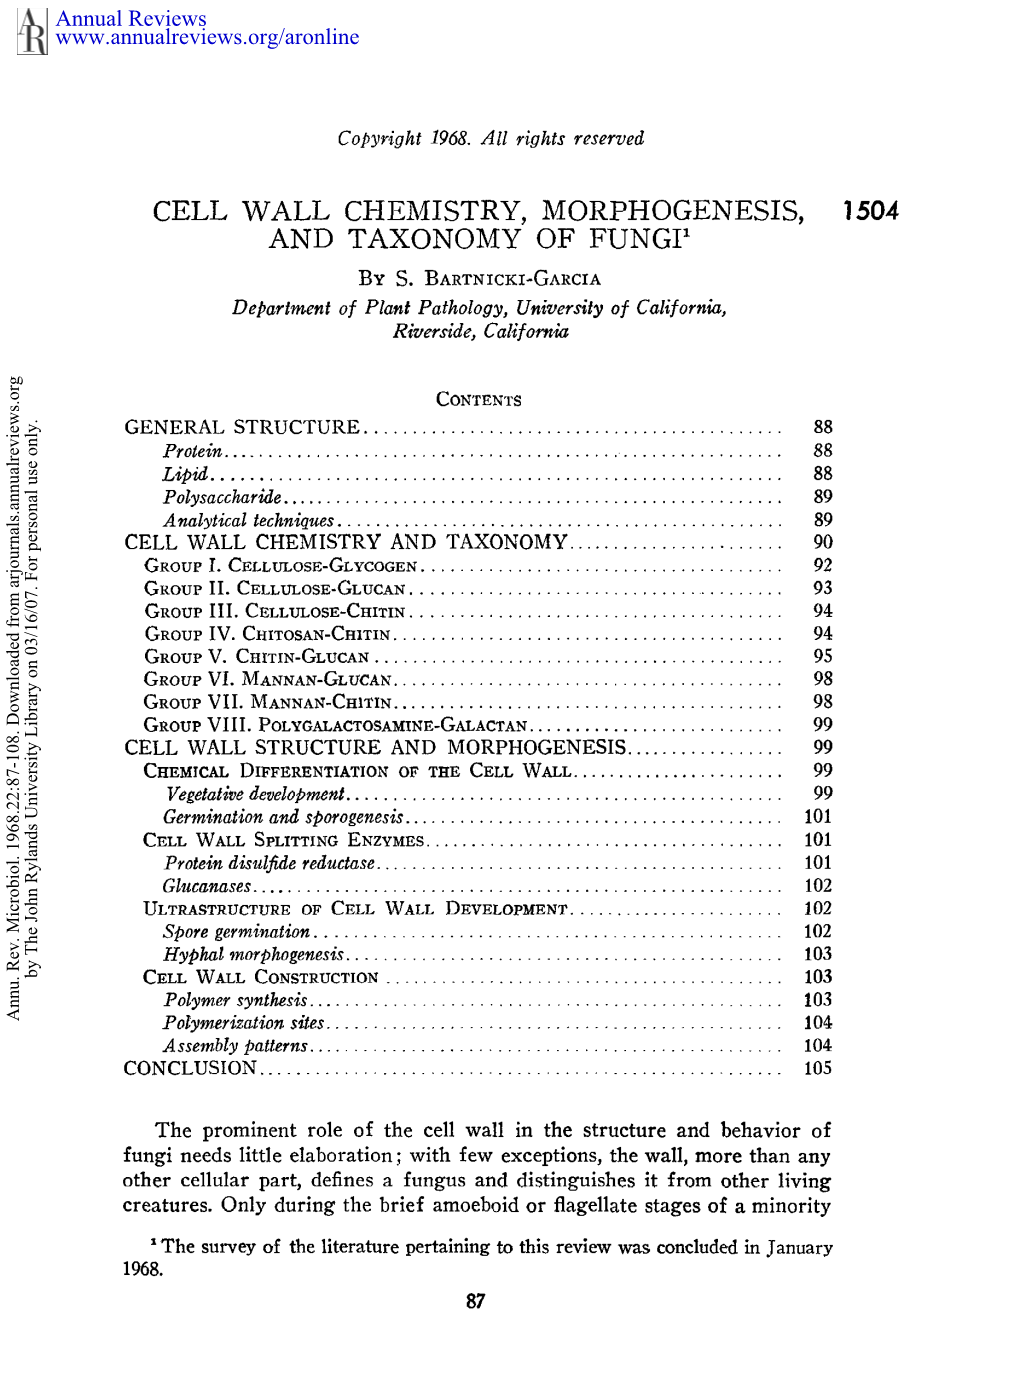 Cell Wall Chemistry, Morphogenesis, and Taxonomy of Fungi